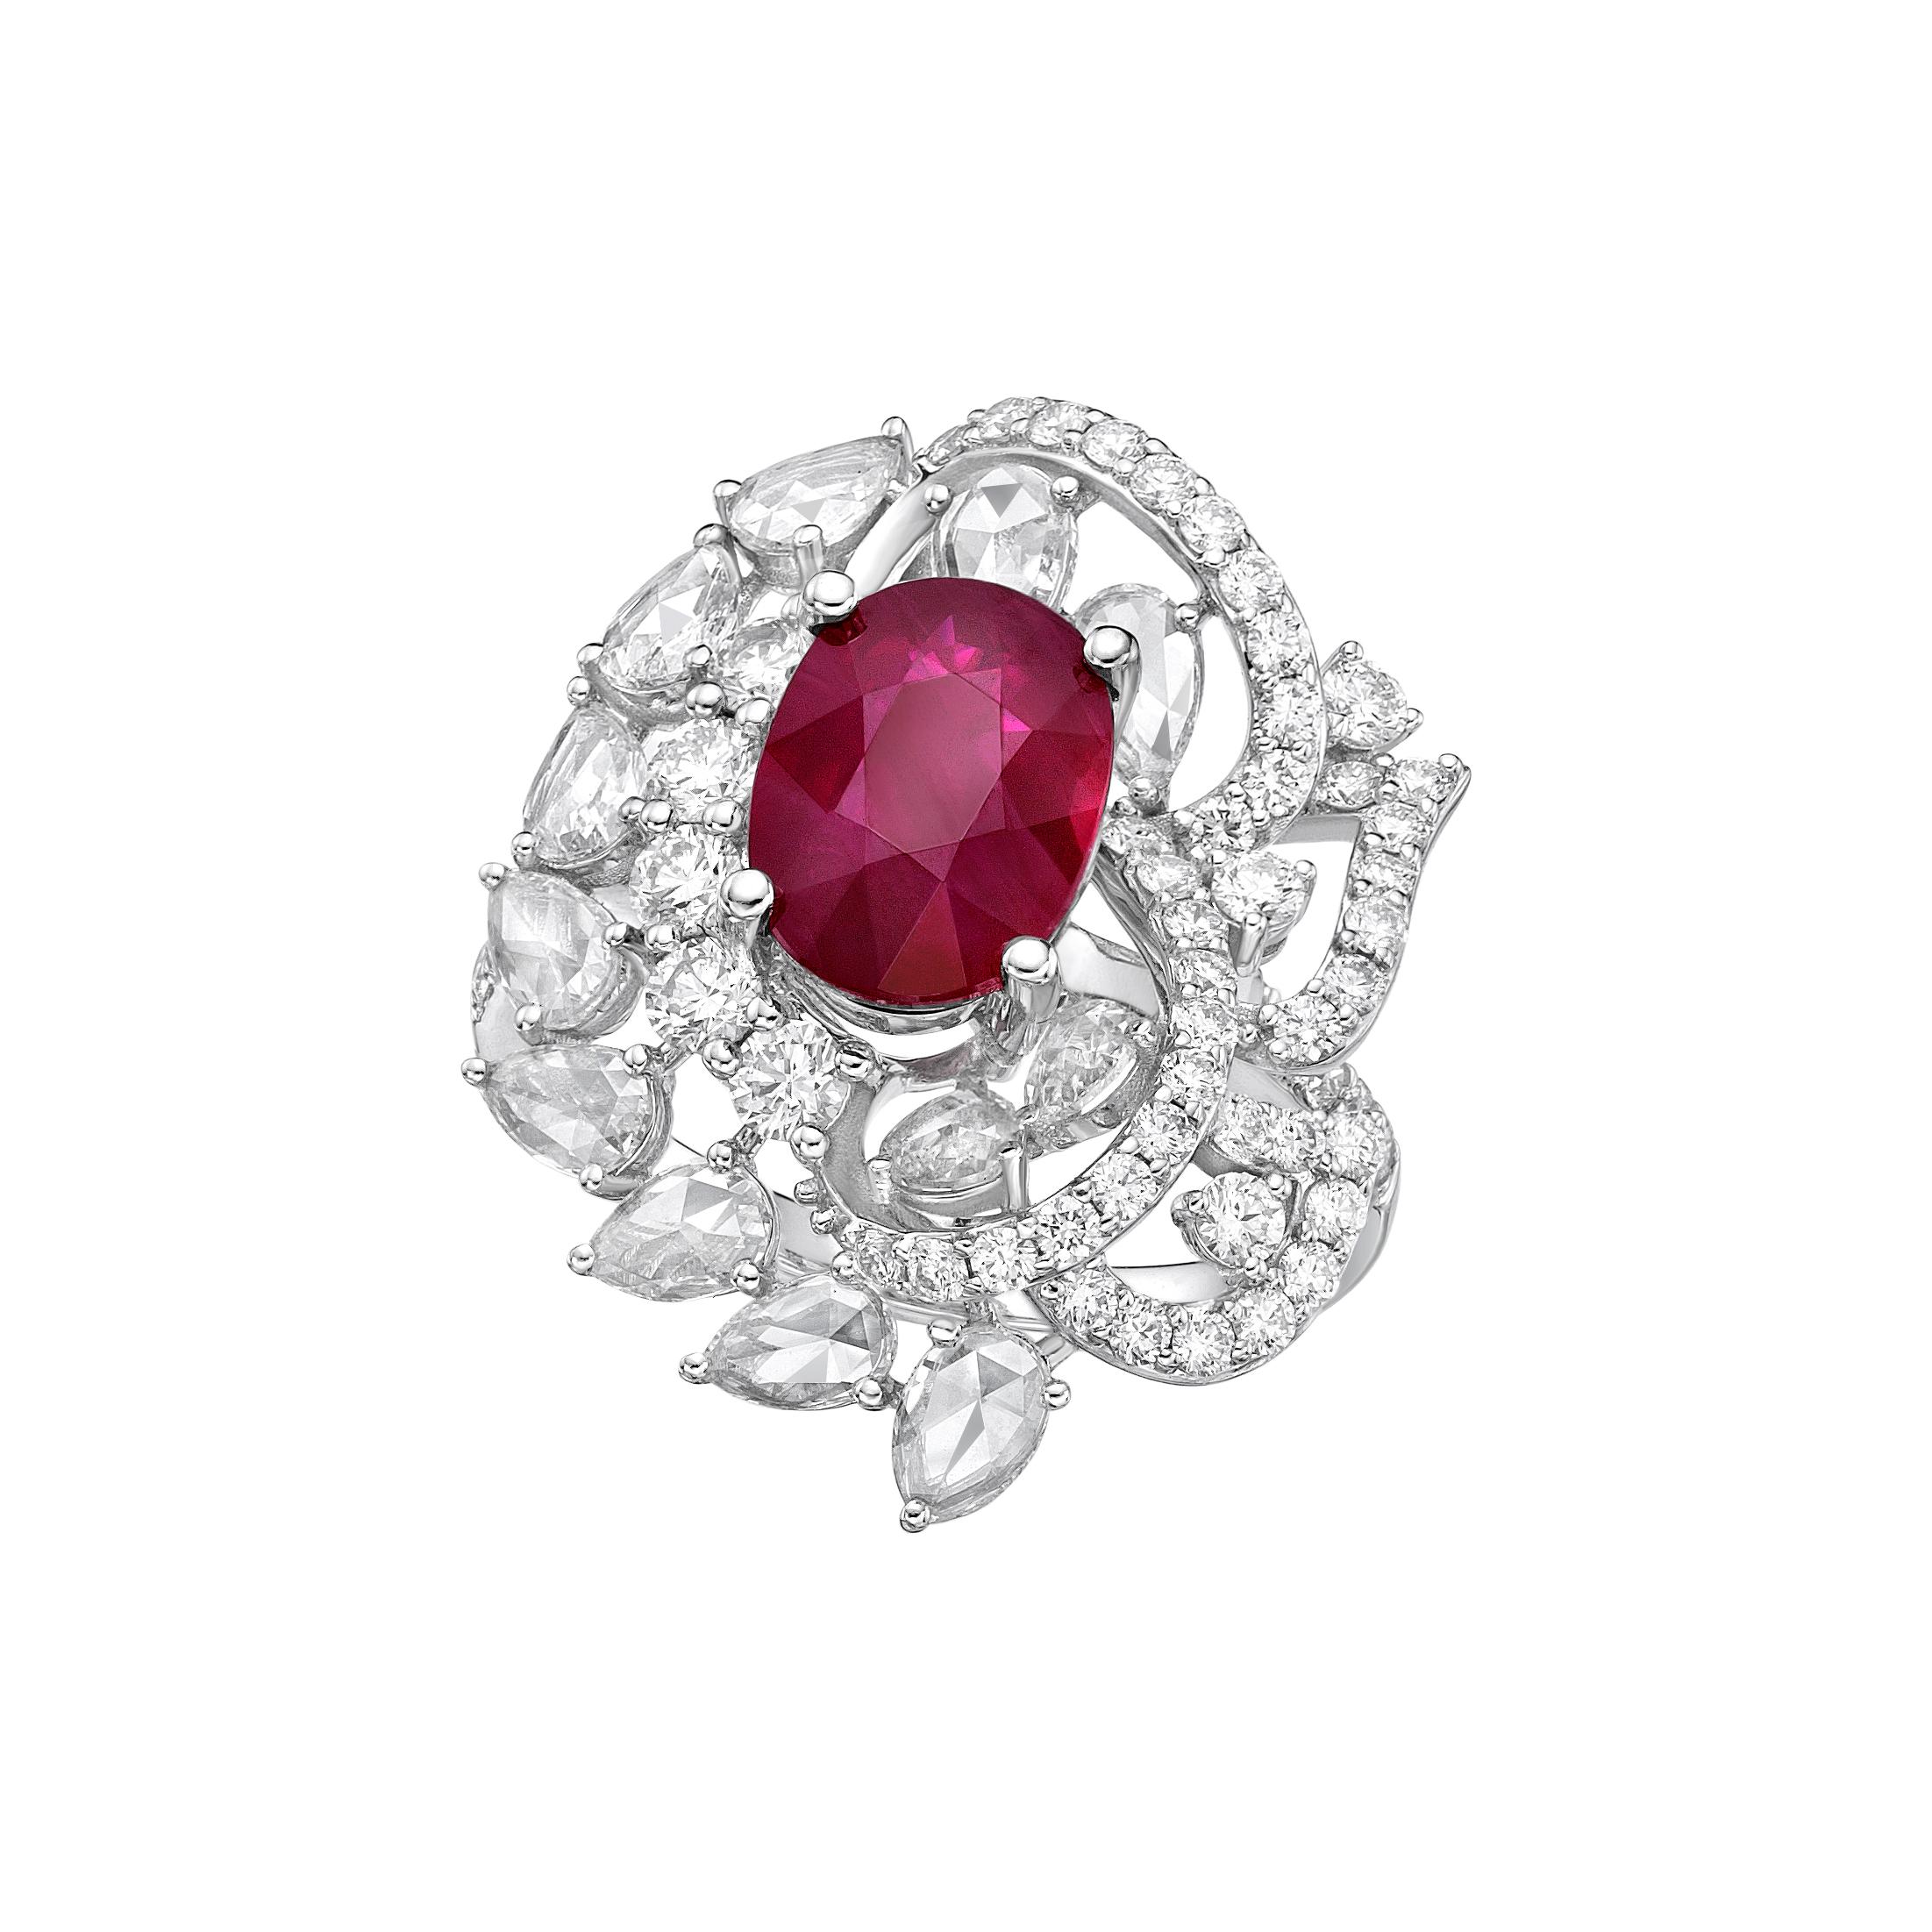 Contemporary GRS Certified Burma 3.04 Carat Pigeon's Blood Ruby and Diamond Ring